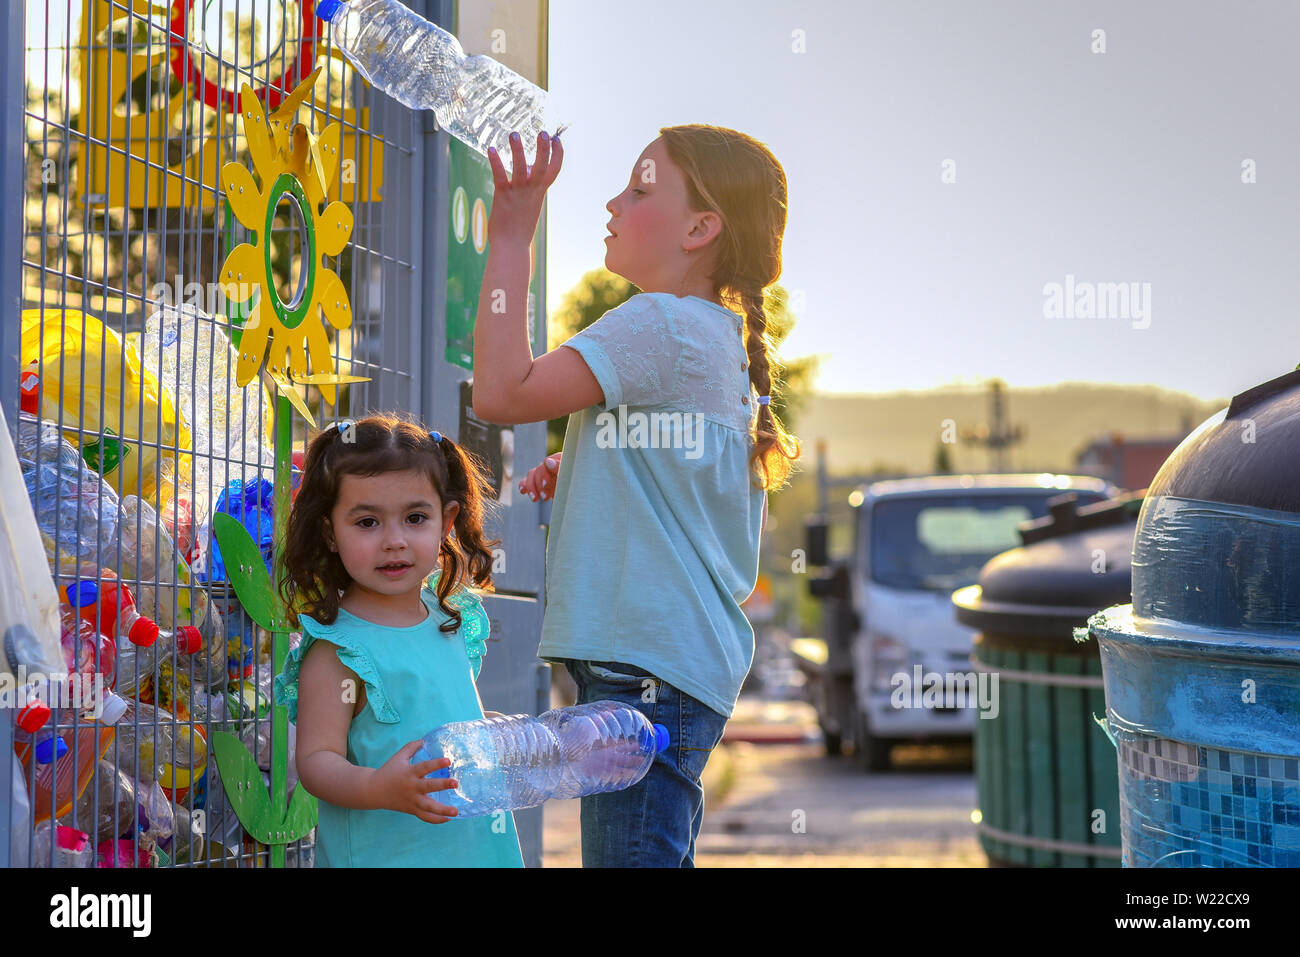 Little Girls Recycling Plastic Water Bottles in Yellow Metal Recycling Cage. Children Puts Plastic Waste in Recycling Bins in Street of City. Stock Photo